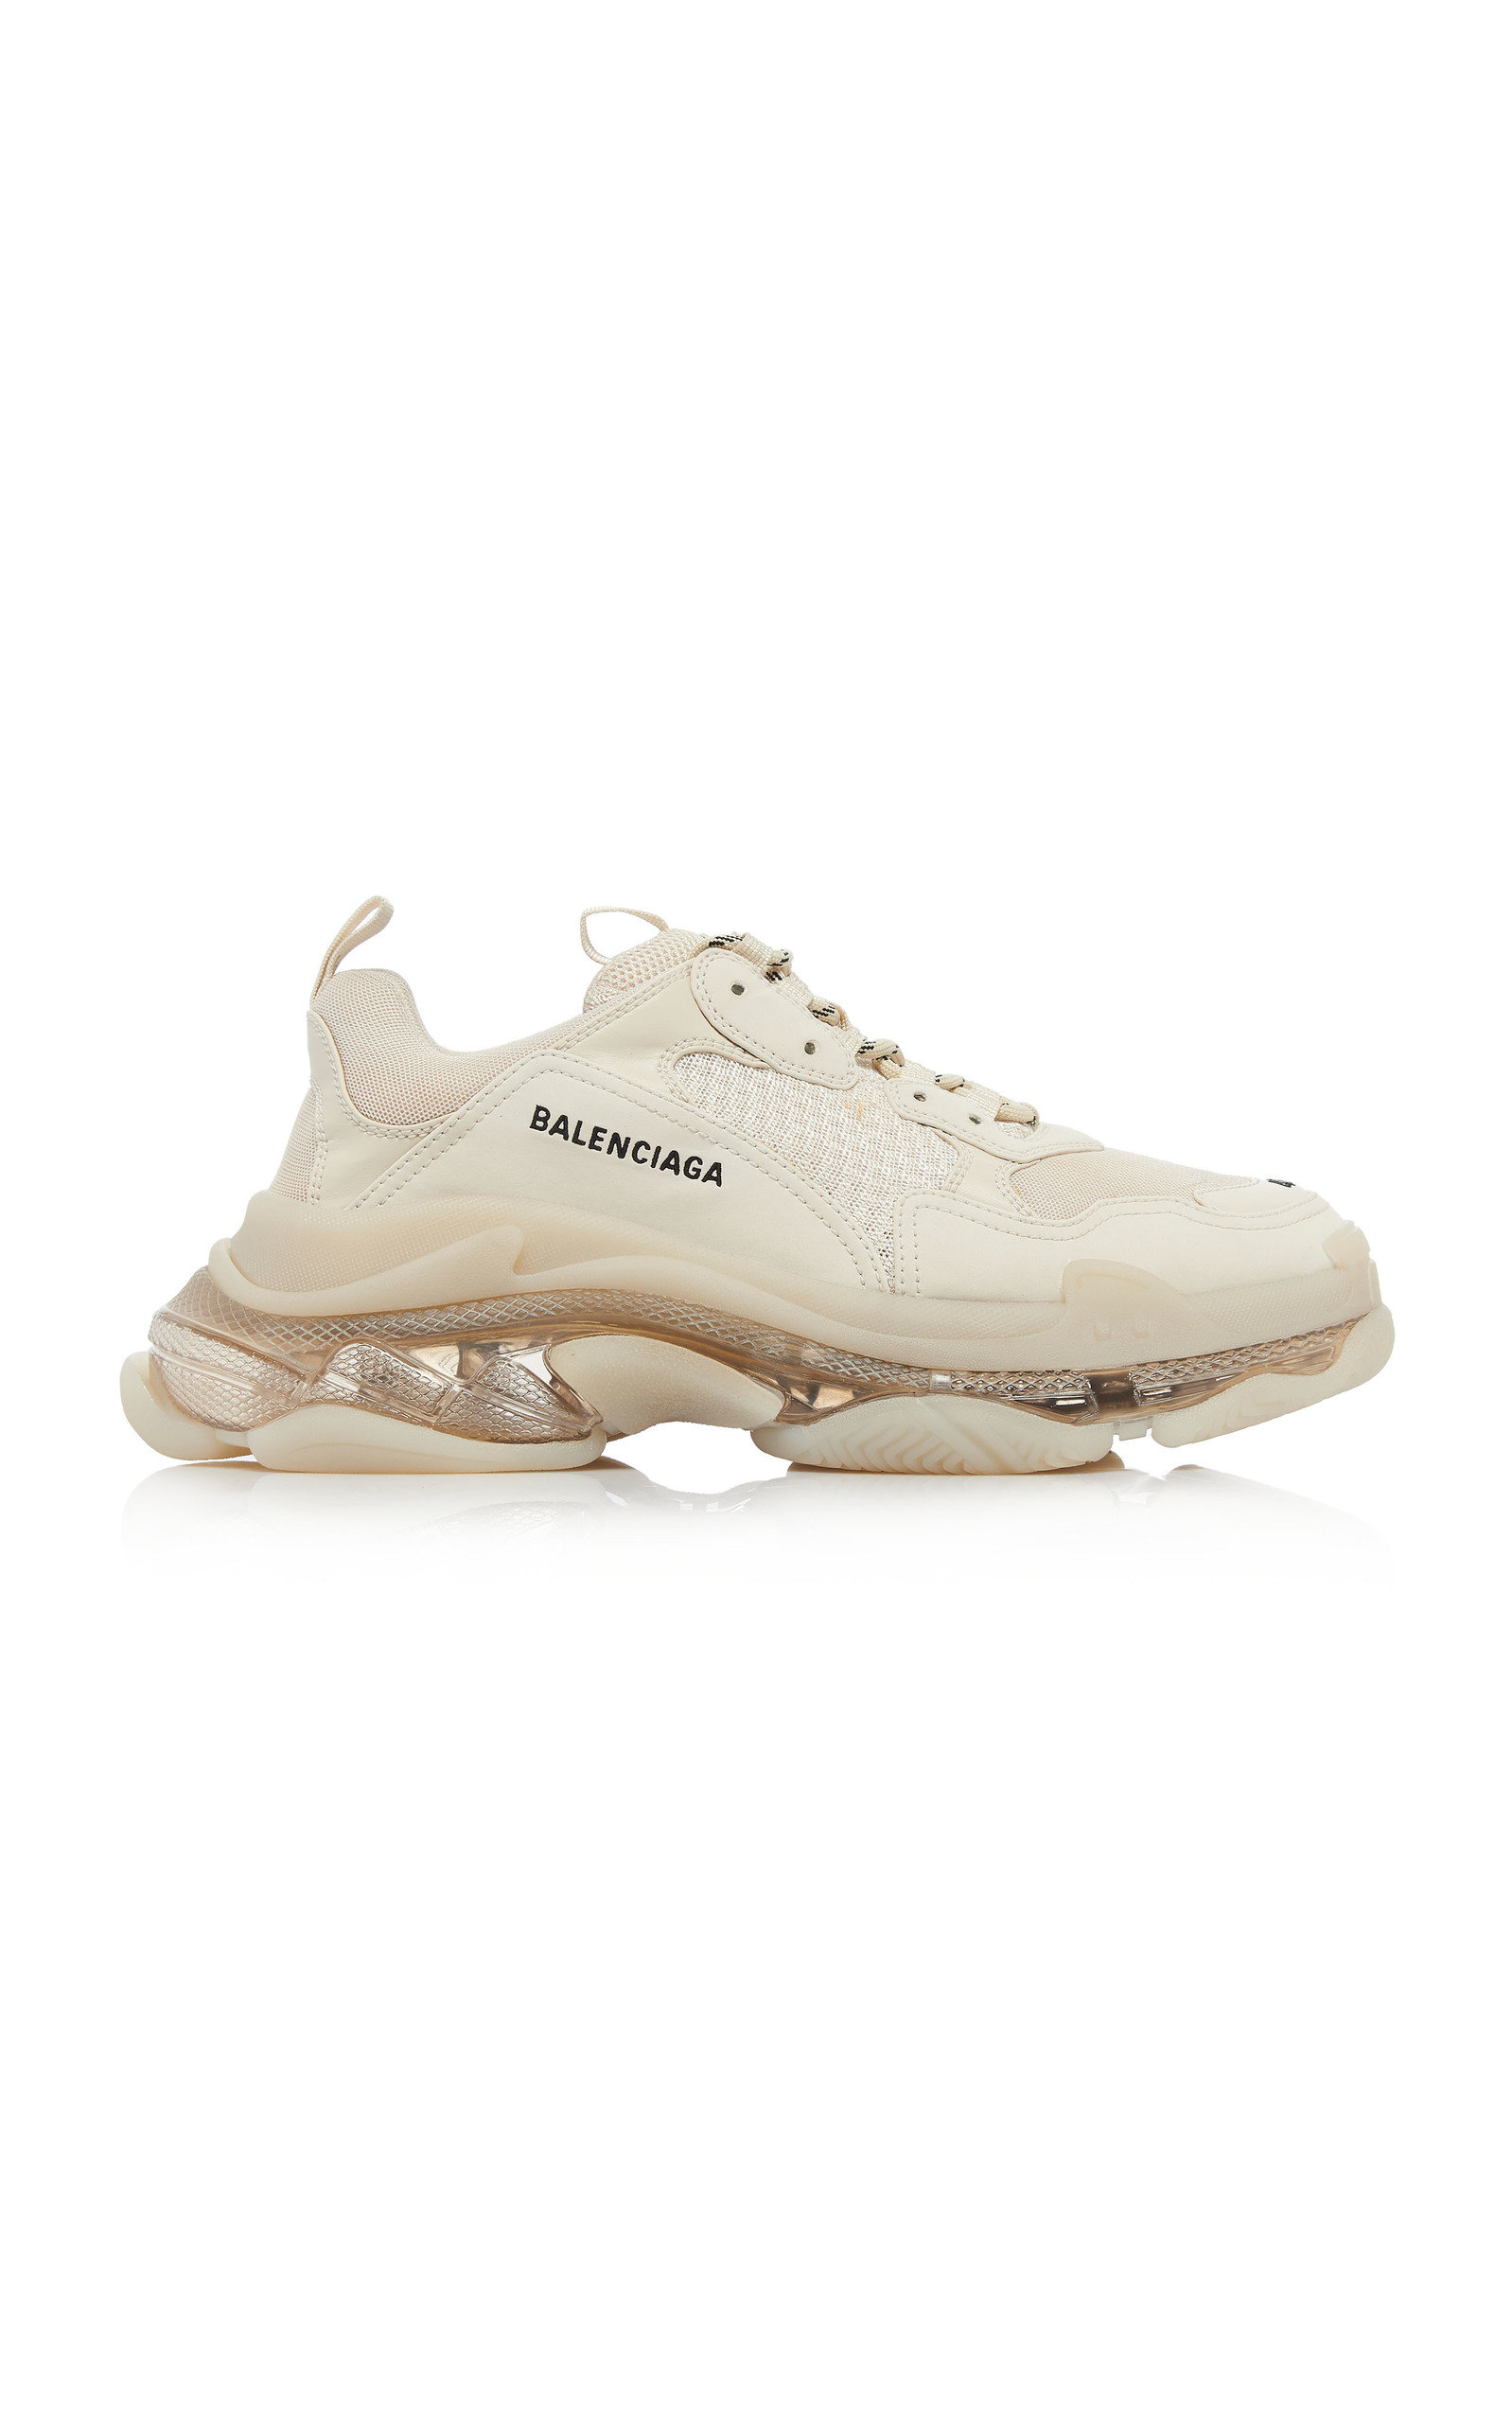 Designer of Balenciaga s Triple S Launches Line of Elevated